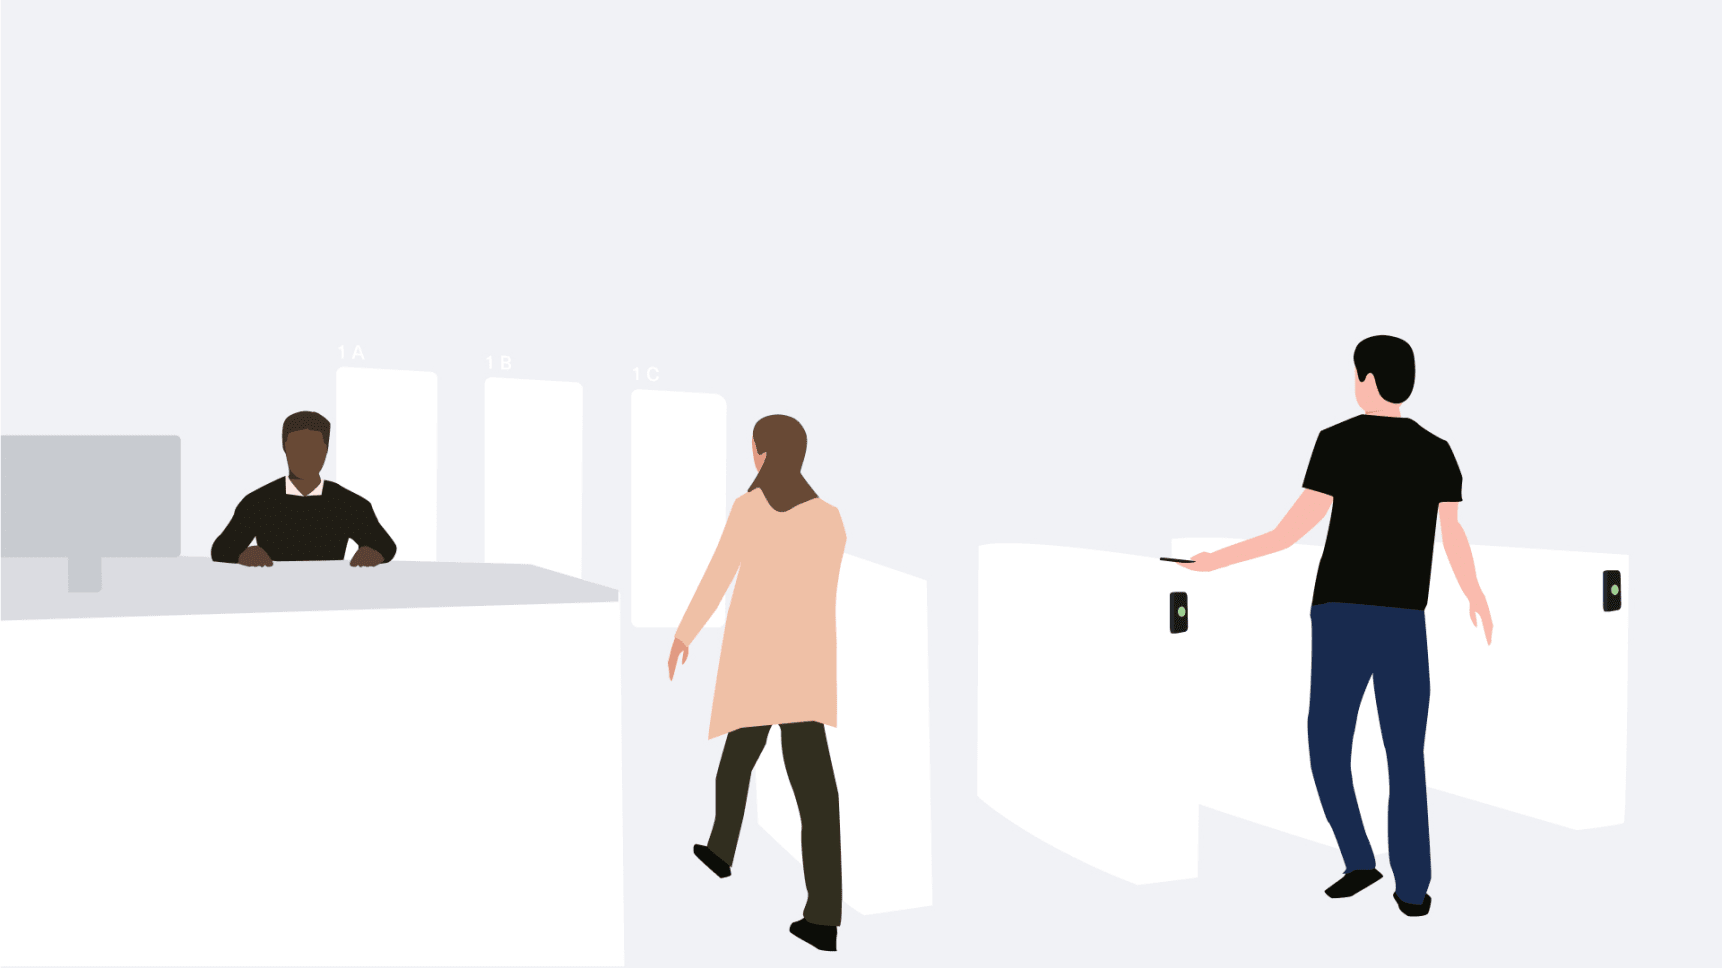 An illustration of two people entering a Kisi secured space by taping cards on turnstiles while the desk employee focuses on his core work